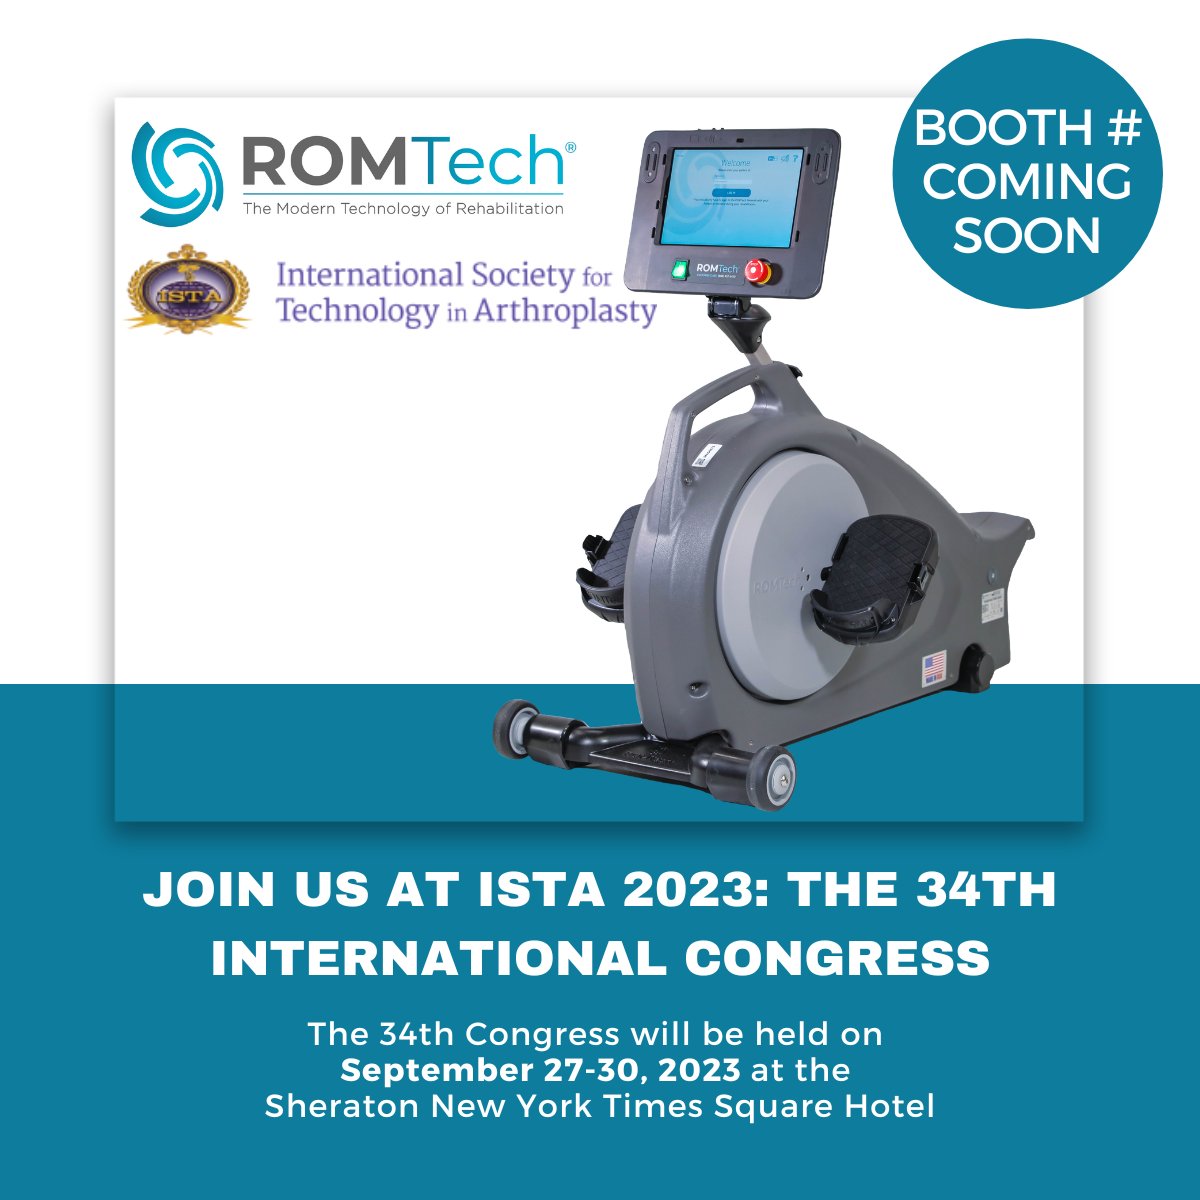 Join us at ISTA 2023: The 34th International Congress next week!
Learn about rehabbing with ROMTech at bit.ly/3snQucI 

#arthroplasty #ista2023 #orthopedics #MedTech